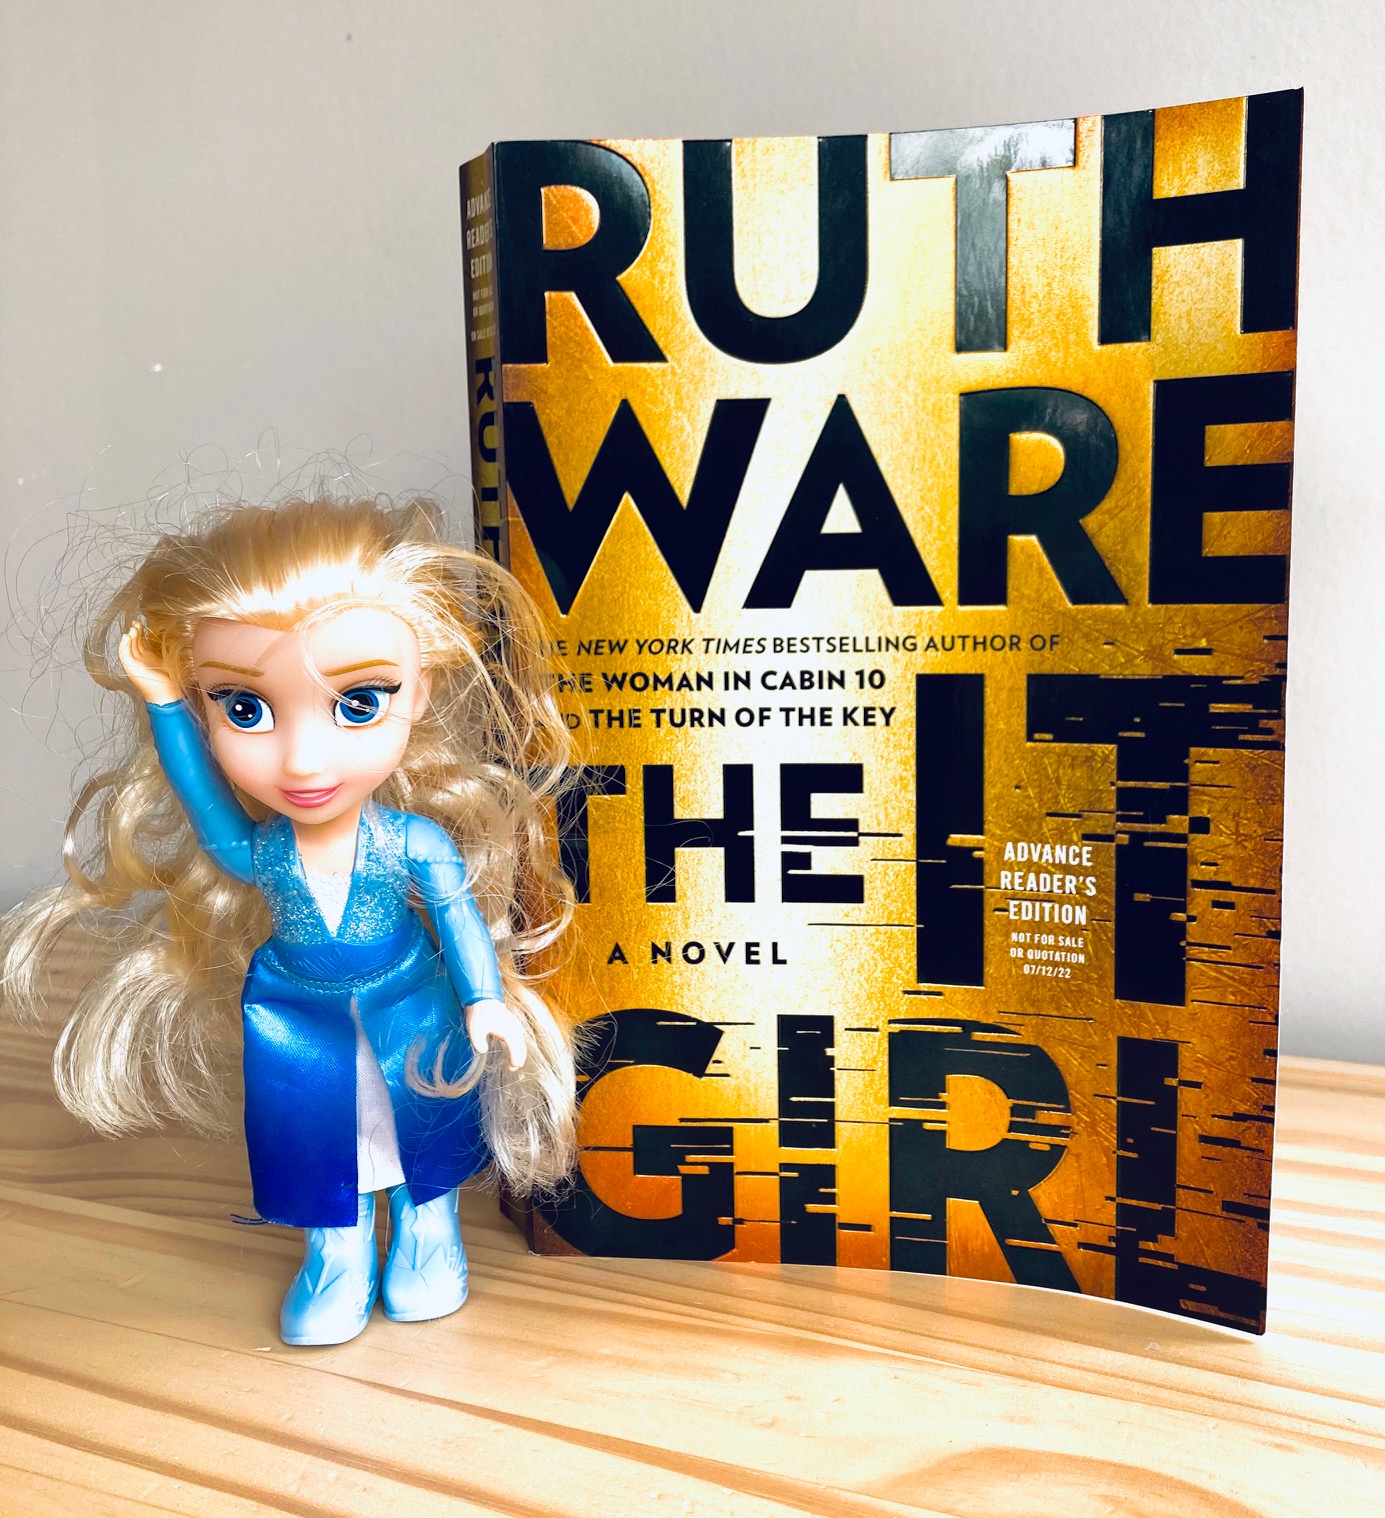 picture of The It Girl book by Ruth Ware, next to a small doll of a blond haired girl in a blue dress